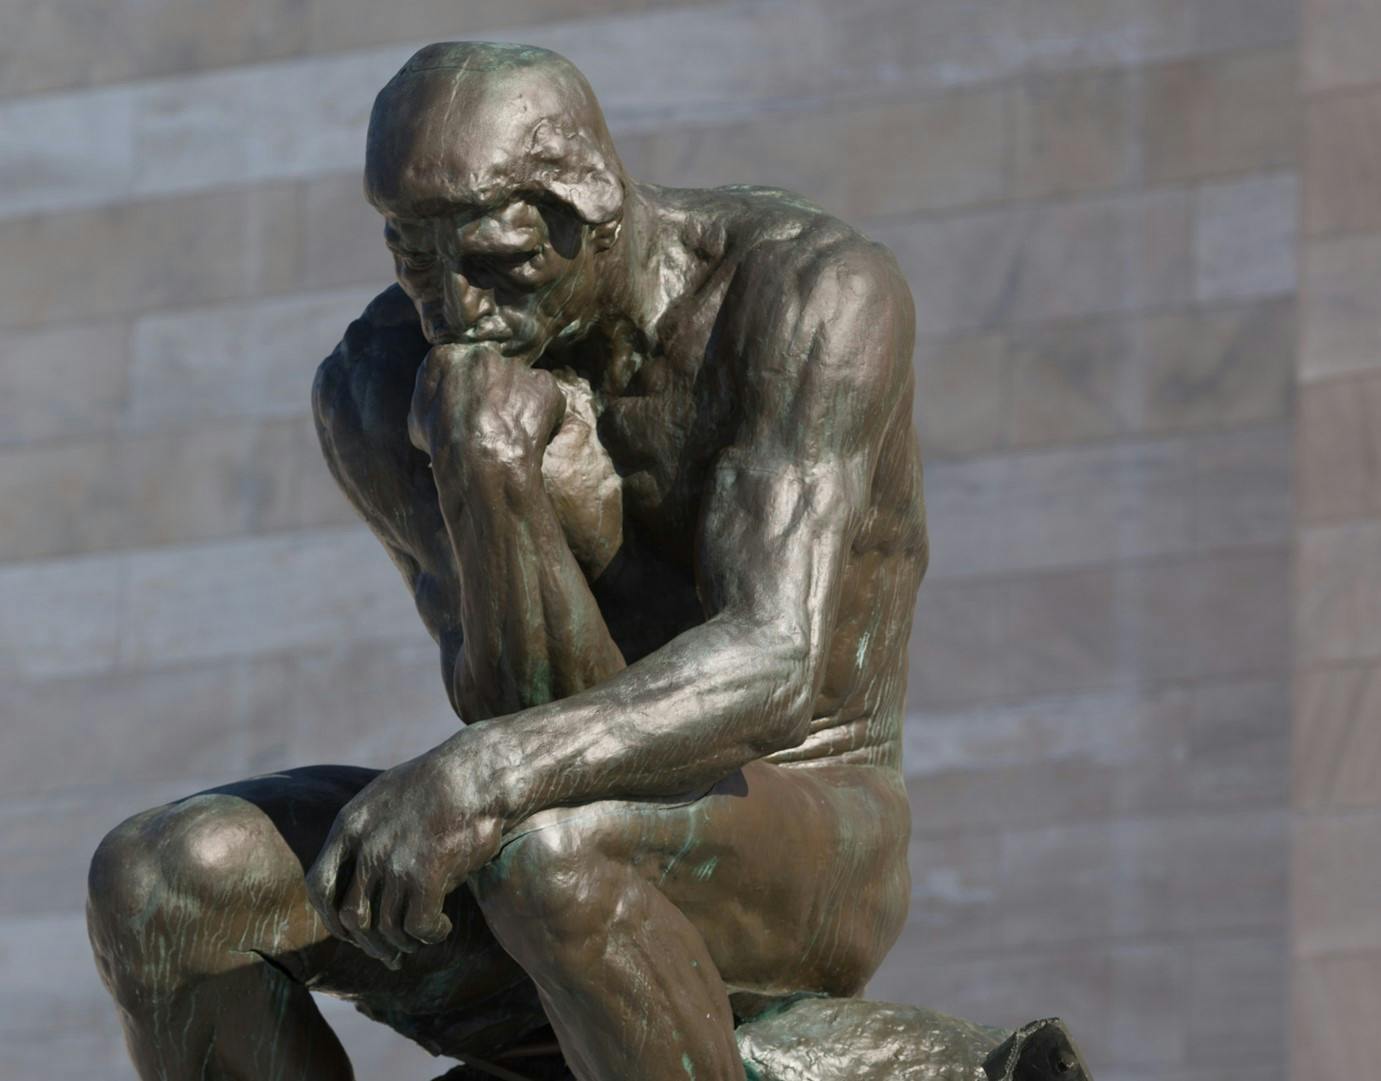 Bronze sculpture by Rodin titled "The Thinker"